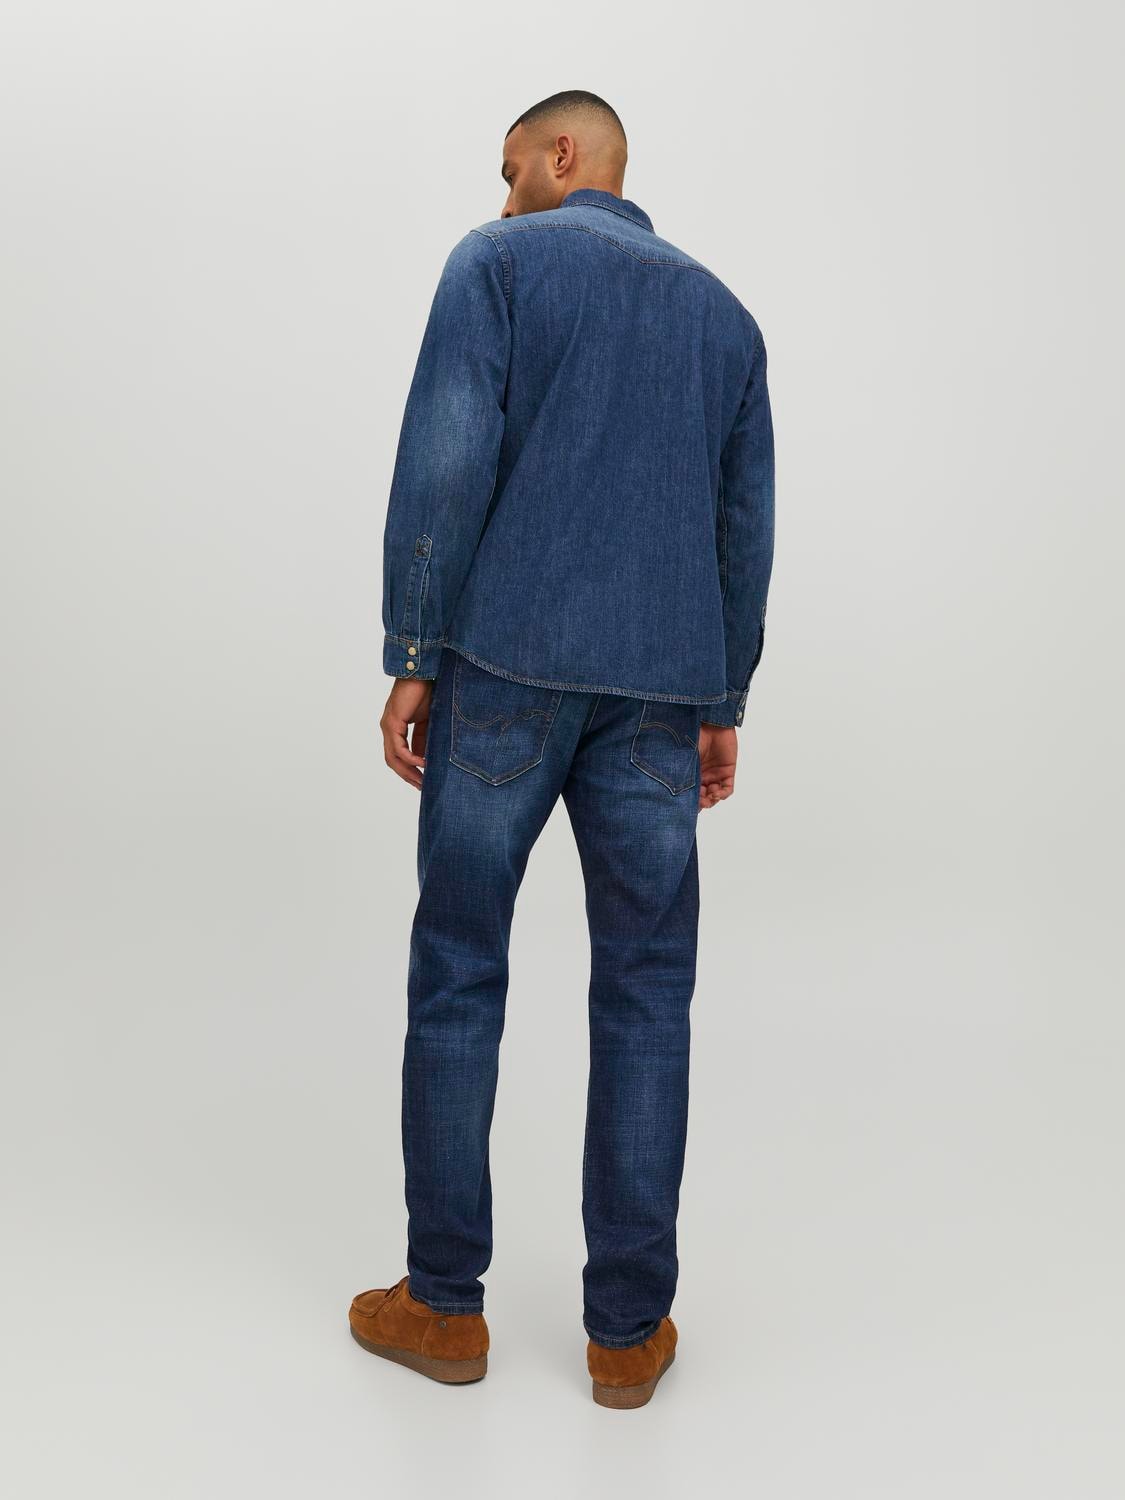 Mike 211 Comfort Fit Jeans-Back view